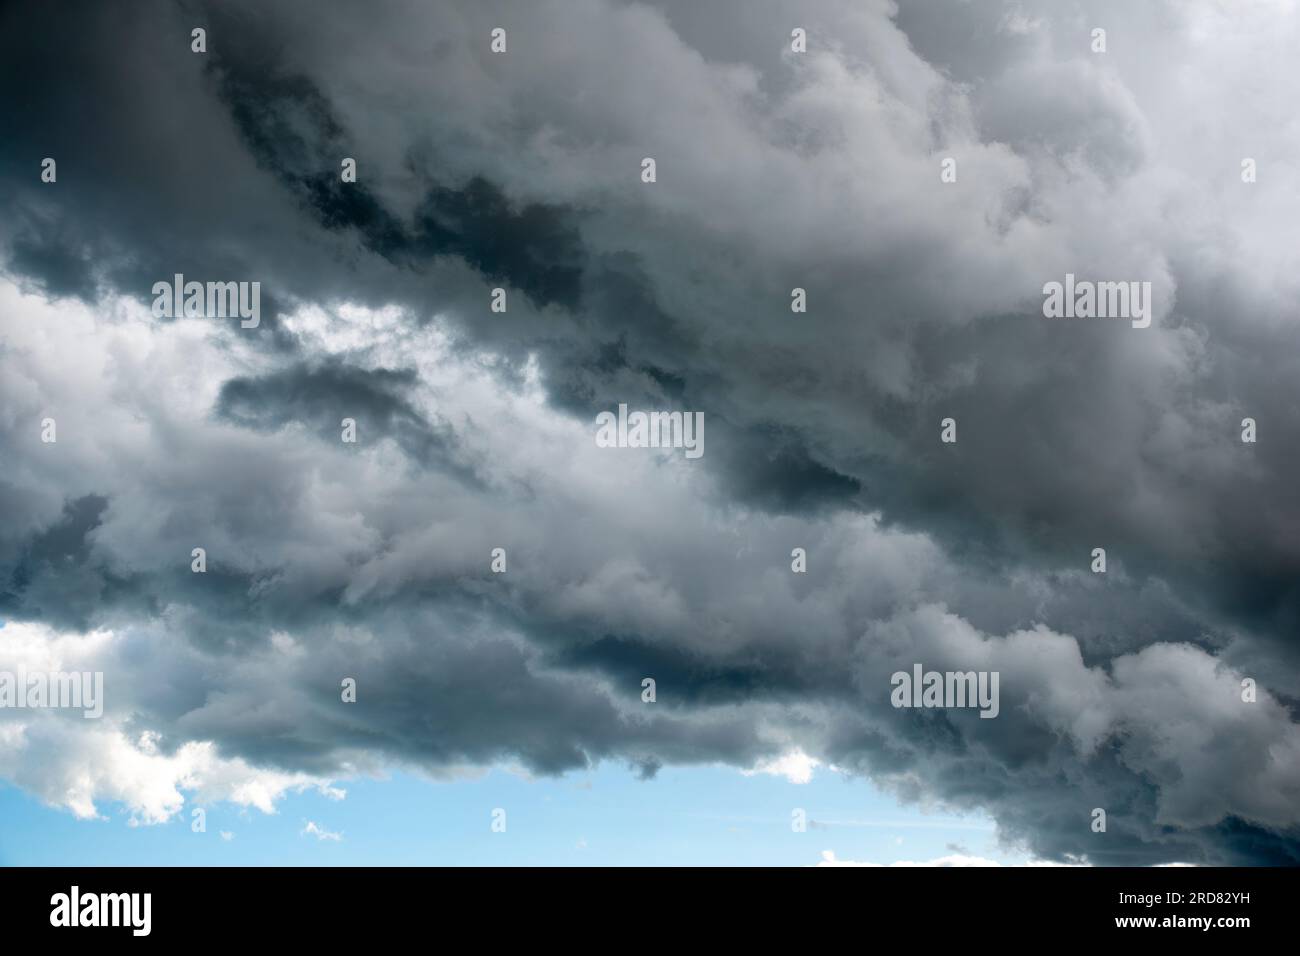 Menacing layers of cloud forming a straight line with strip of clear sky showing a darker smear of rain. Stock Photo